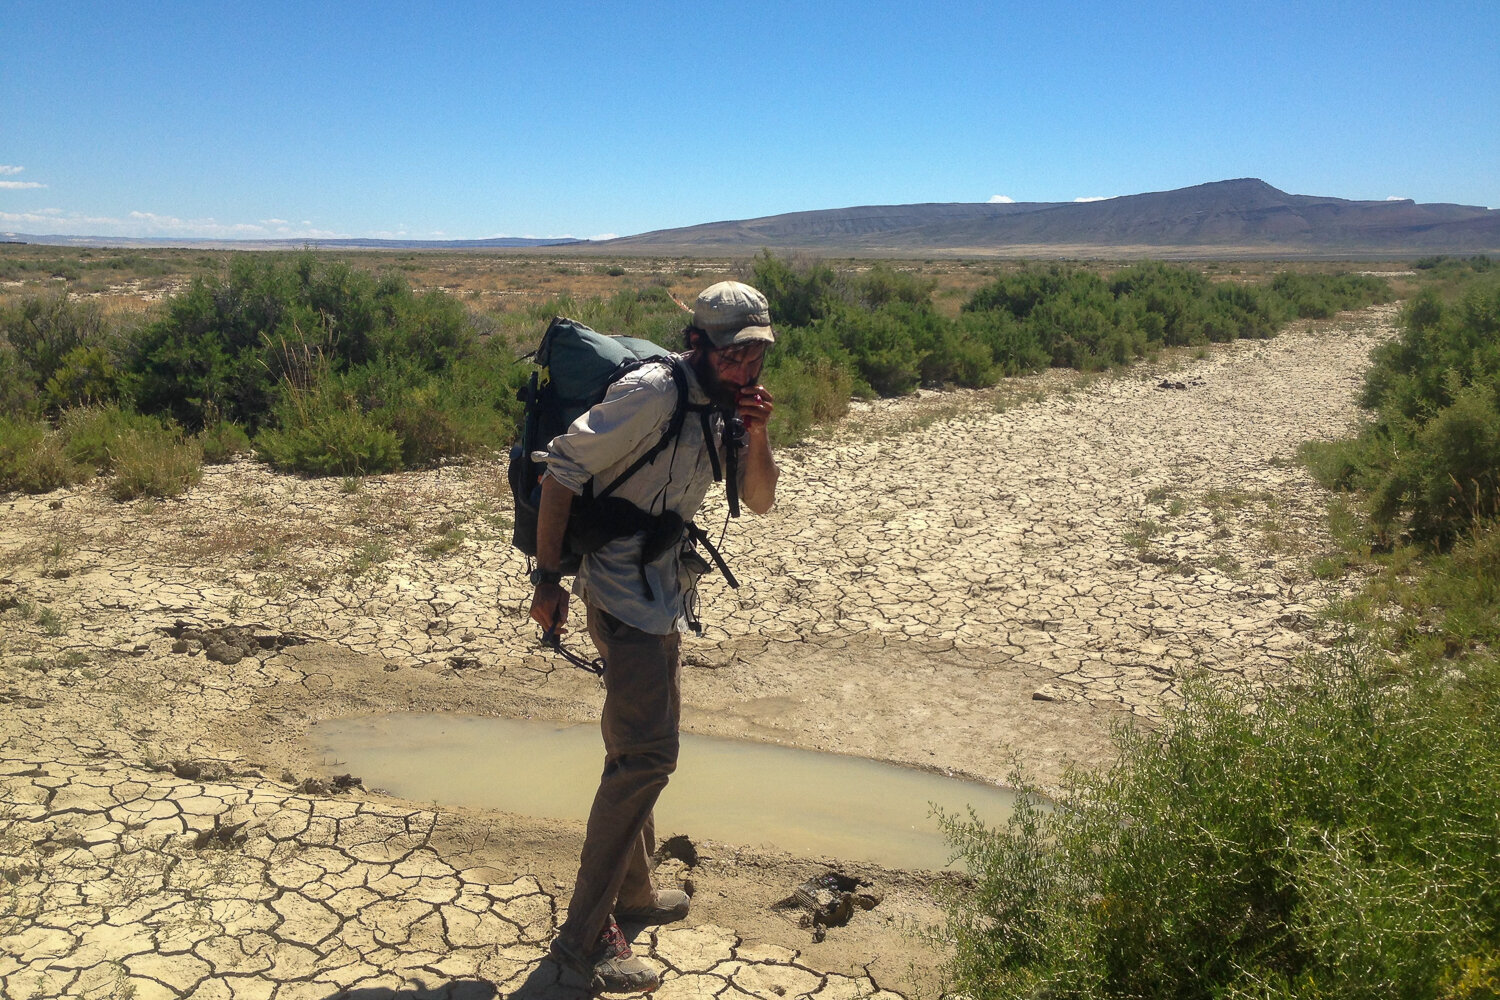 Using some water from a muddy rut to cool off to avoid heat exhaustion in the desert